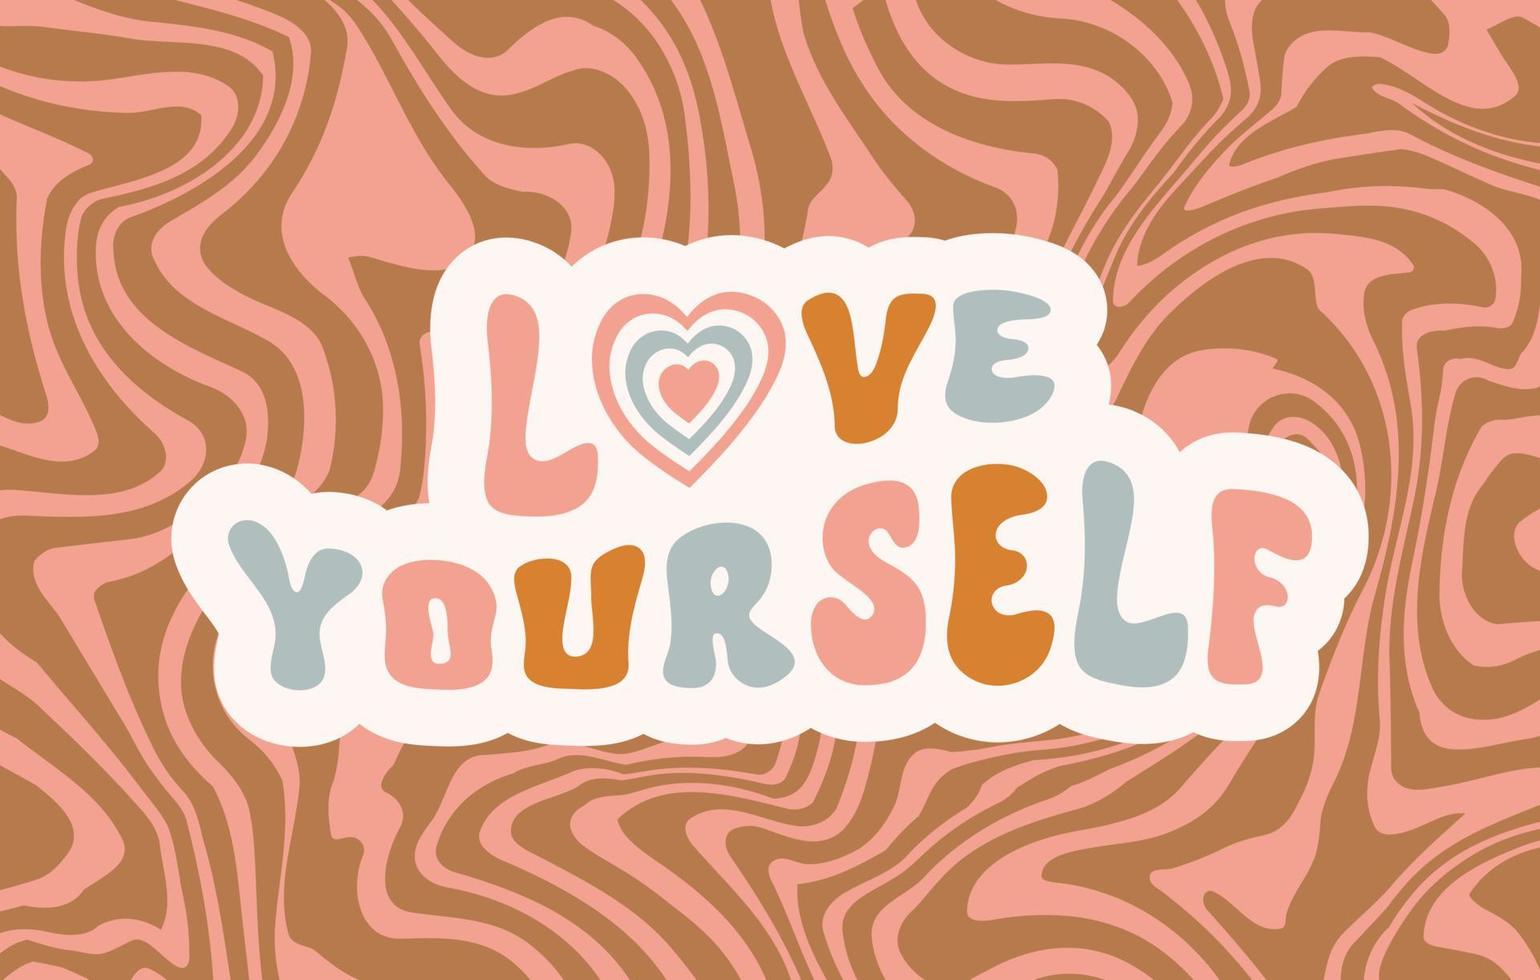 Retro inspirational slogan Love Yourself isolated on a wavy background. Trendy groovy vintage print in style 70s, 80s. Horizontal banner, print, poster. Vector illustration